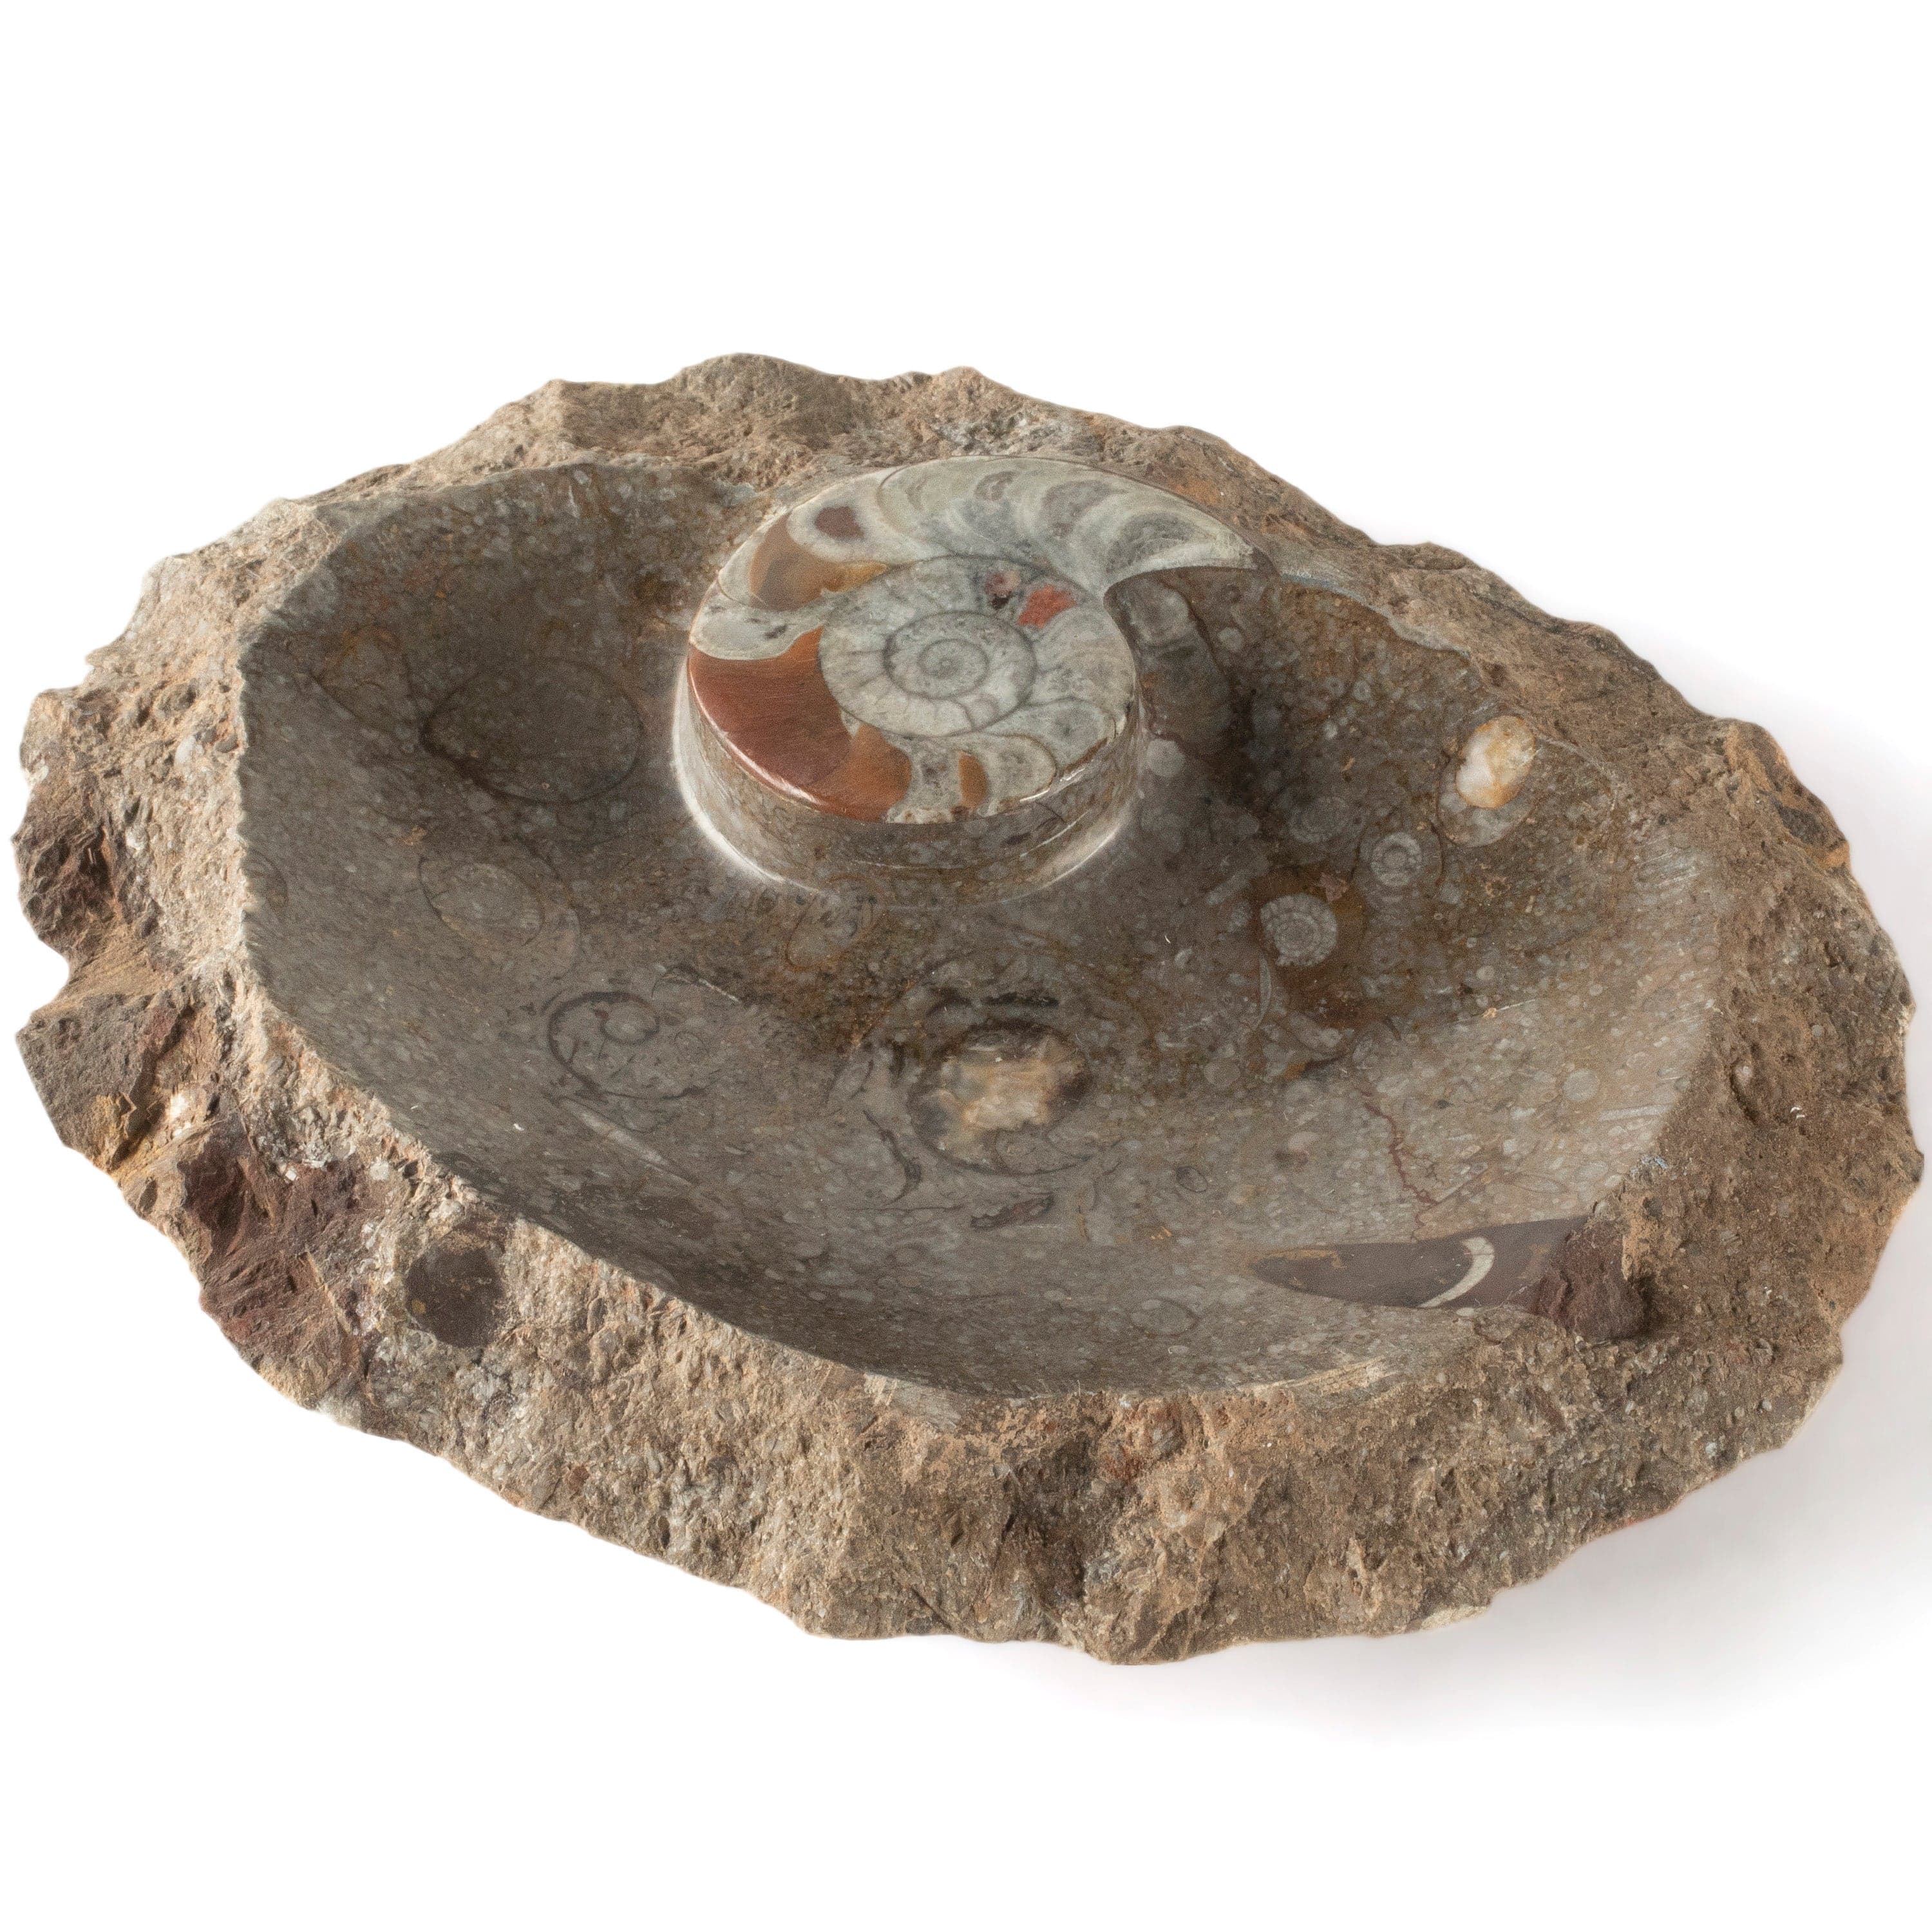 Kalifano Fossils & Minerals Brown Natural Ammonite Dish / Ashtray from Morocco - 9" BAM240-BN